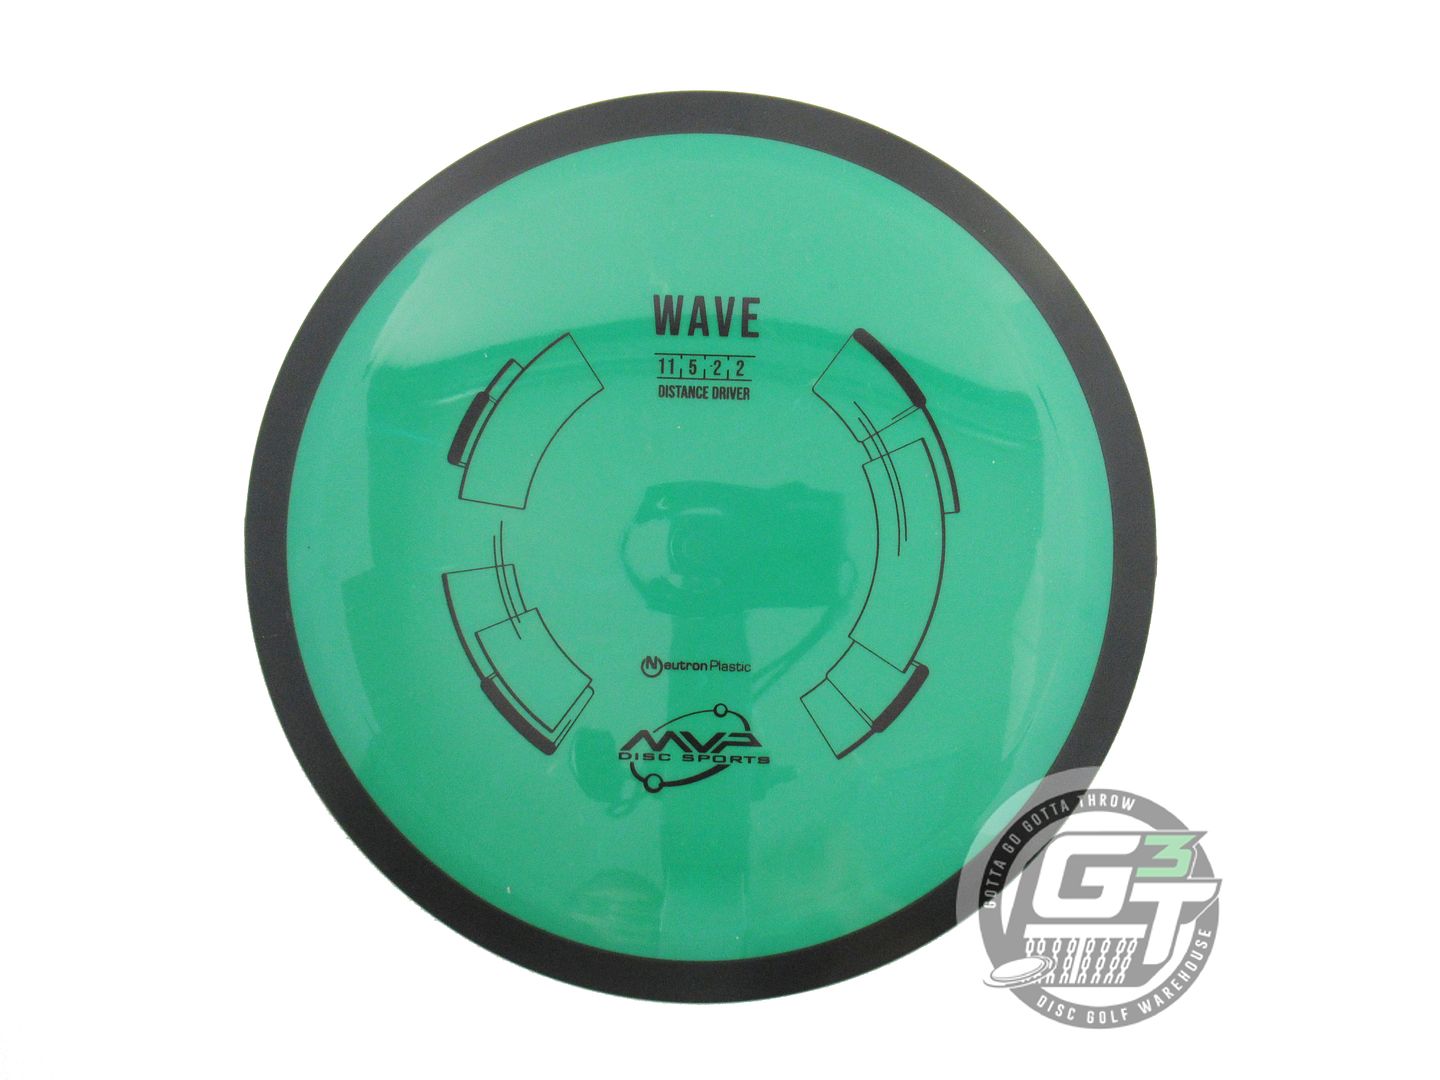 MVP Neutron Wave Distance Driver Golf Disc (Individually Listed)